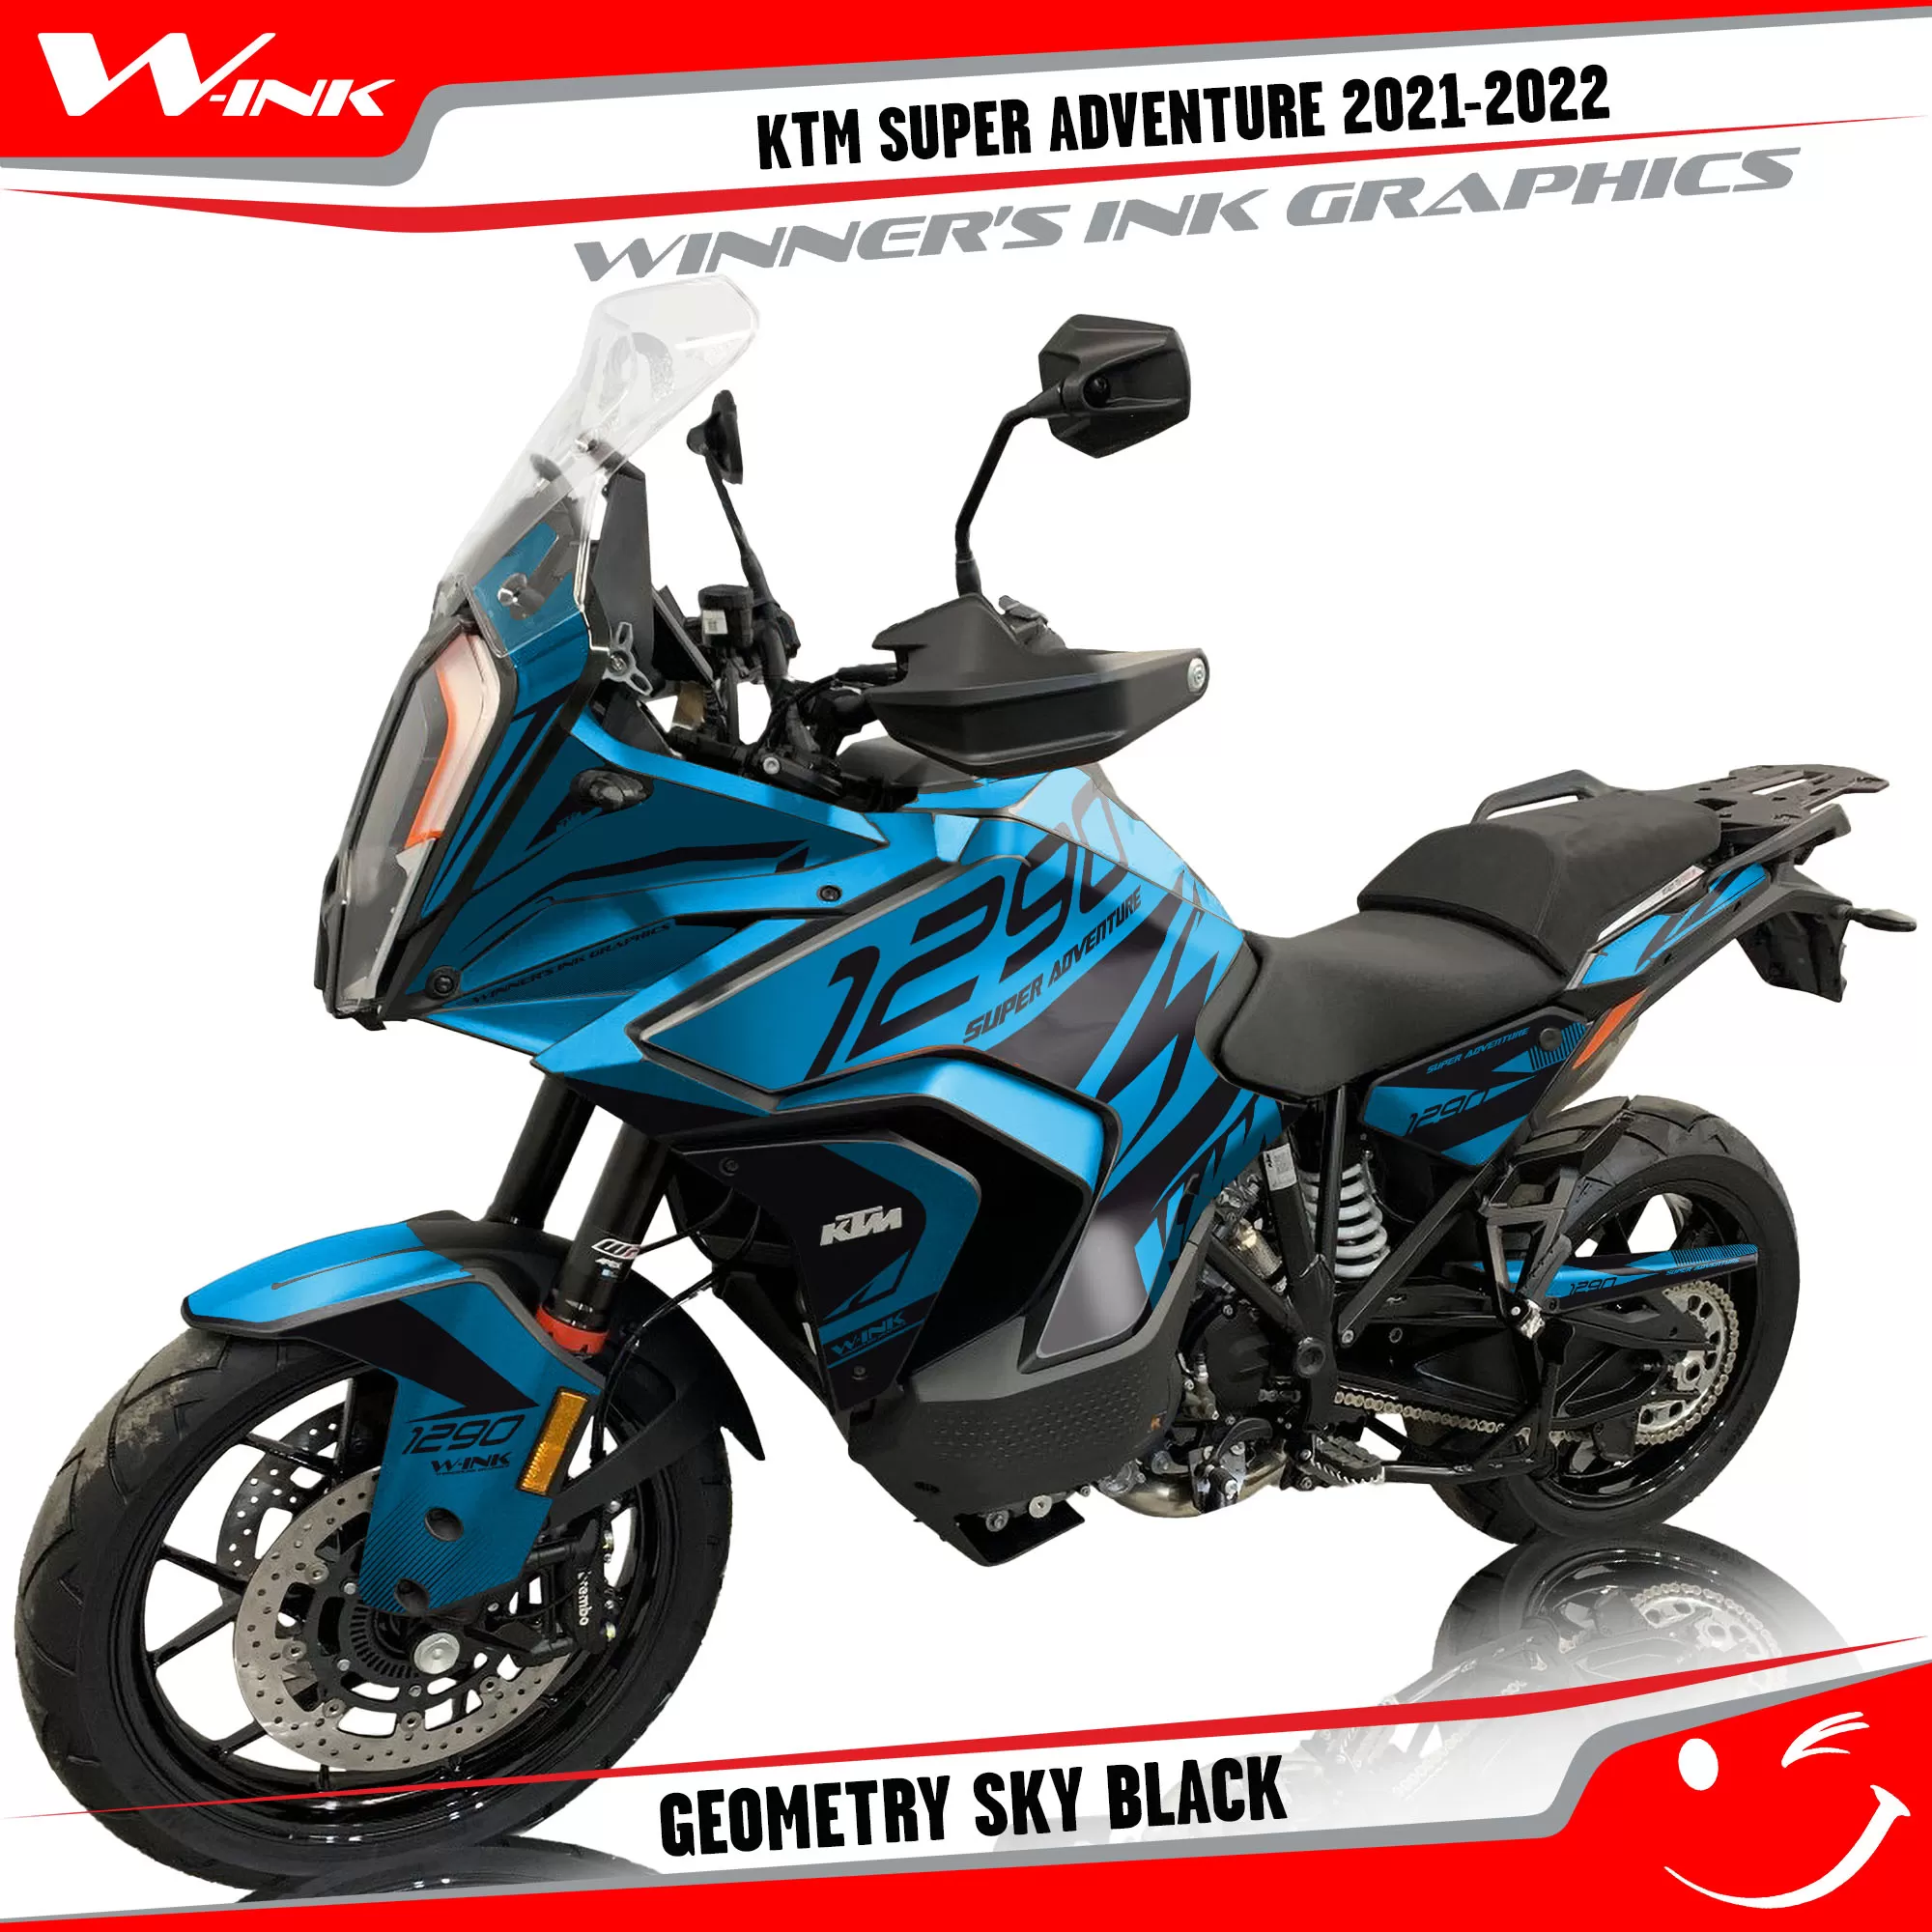 KTM-Super-Adventure-S-2021-2022-graphics-kit-and-decals-with-designs-Geometry-Sky-Black